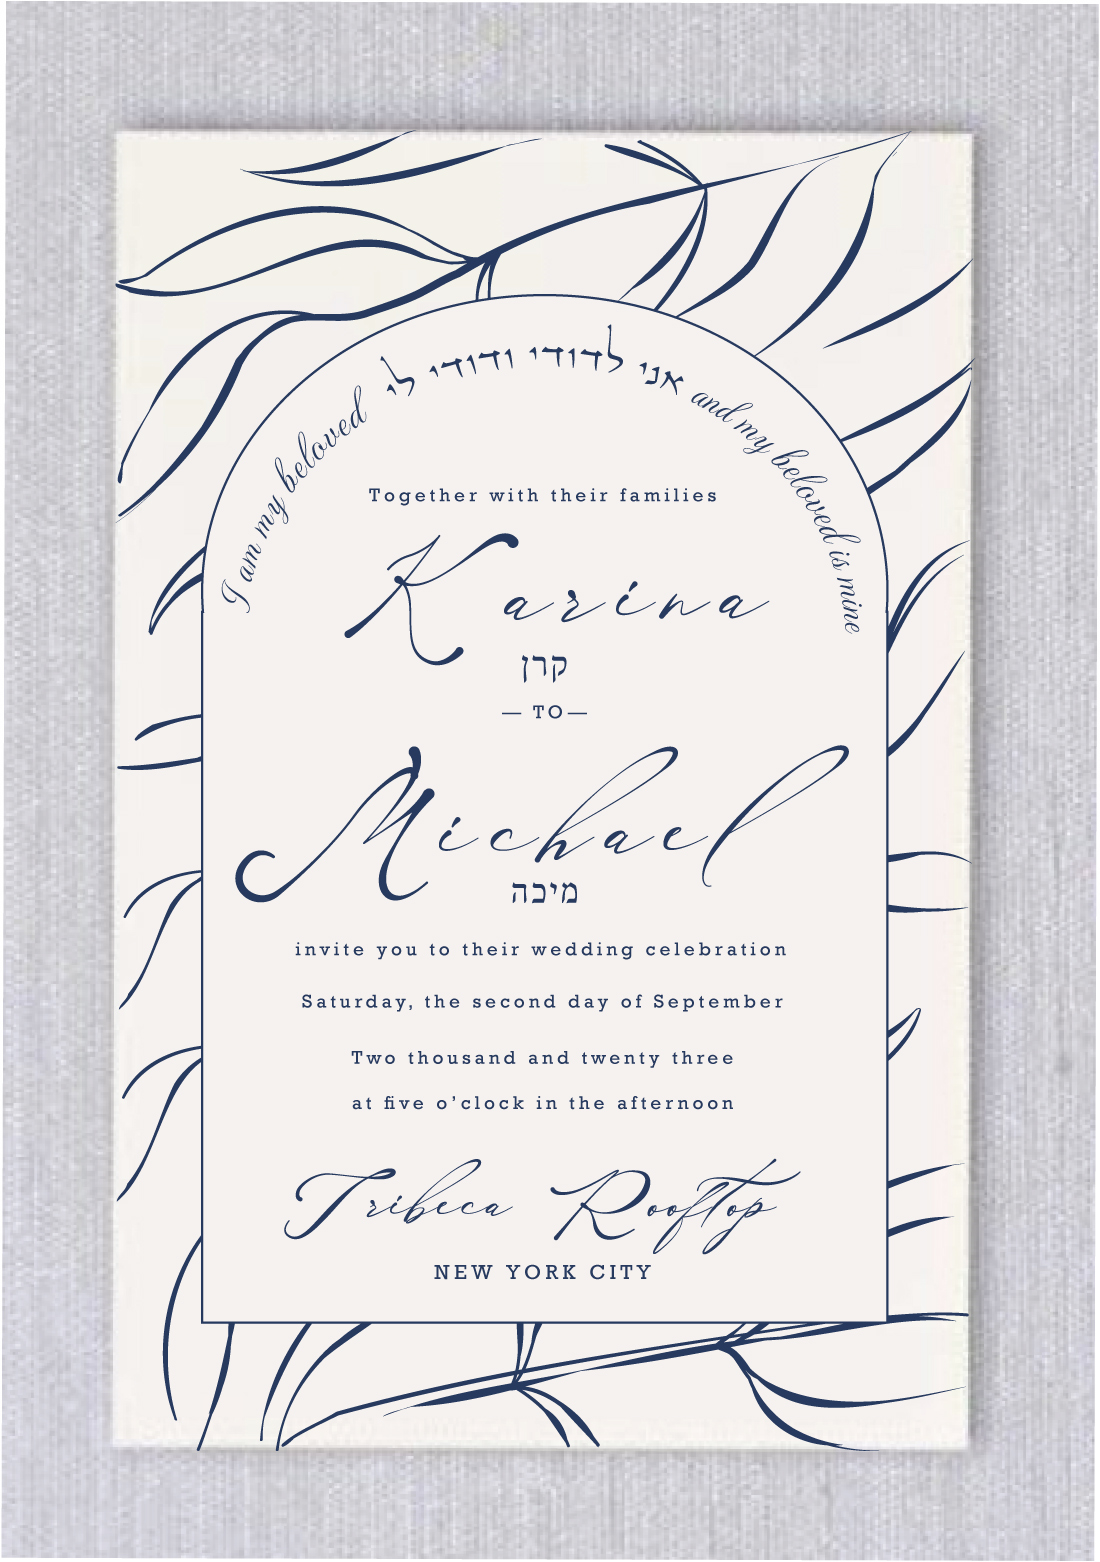 Blowing Leaves Jewish Wedding Invitations is a steadfast favorite in our Jewish wedding collection. Here, we gave it the "Blowing Leaves in Navy" treatment, making it the perfect invitation suite for an elegant, contemporary affair. A heading "I am my beloved and my beloved is mine" in Hebrew and English around the floral border adds a touch of playfulness.